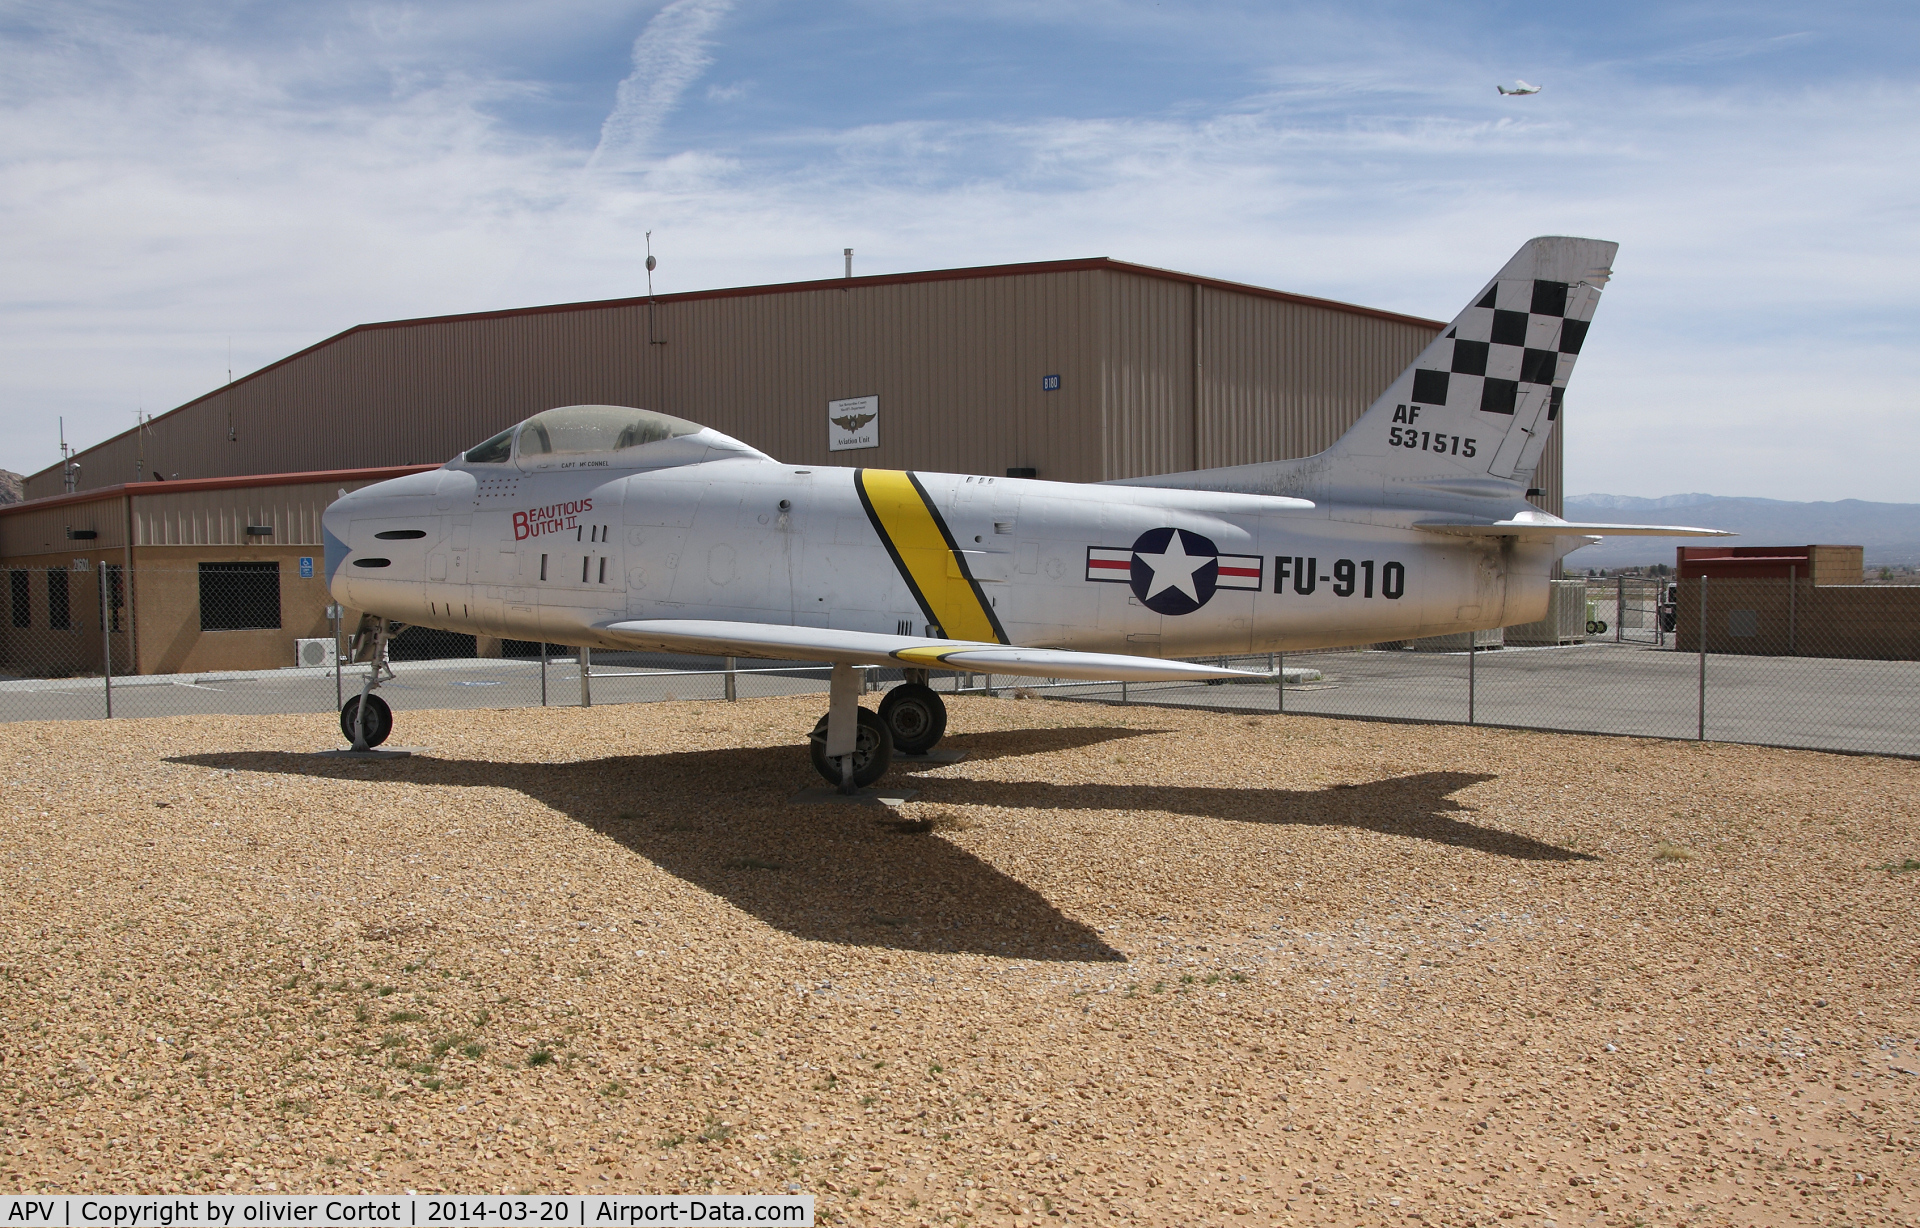 Apple Valley Airport (APV) - The guate guardian, a F-86H